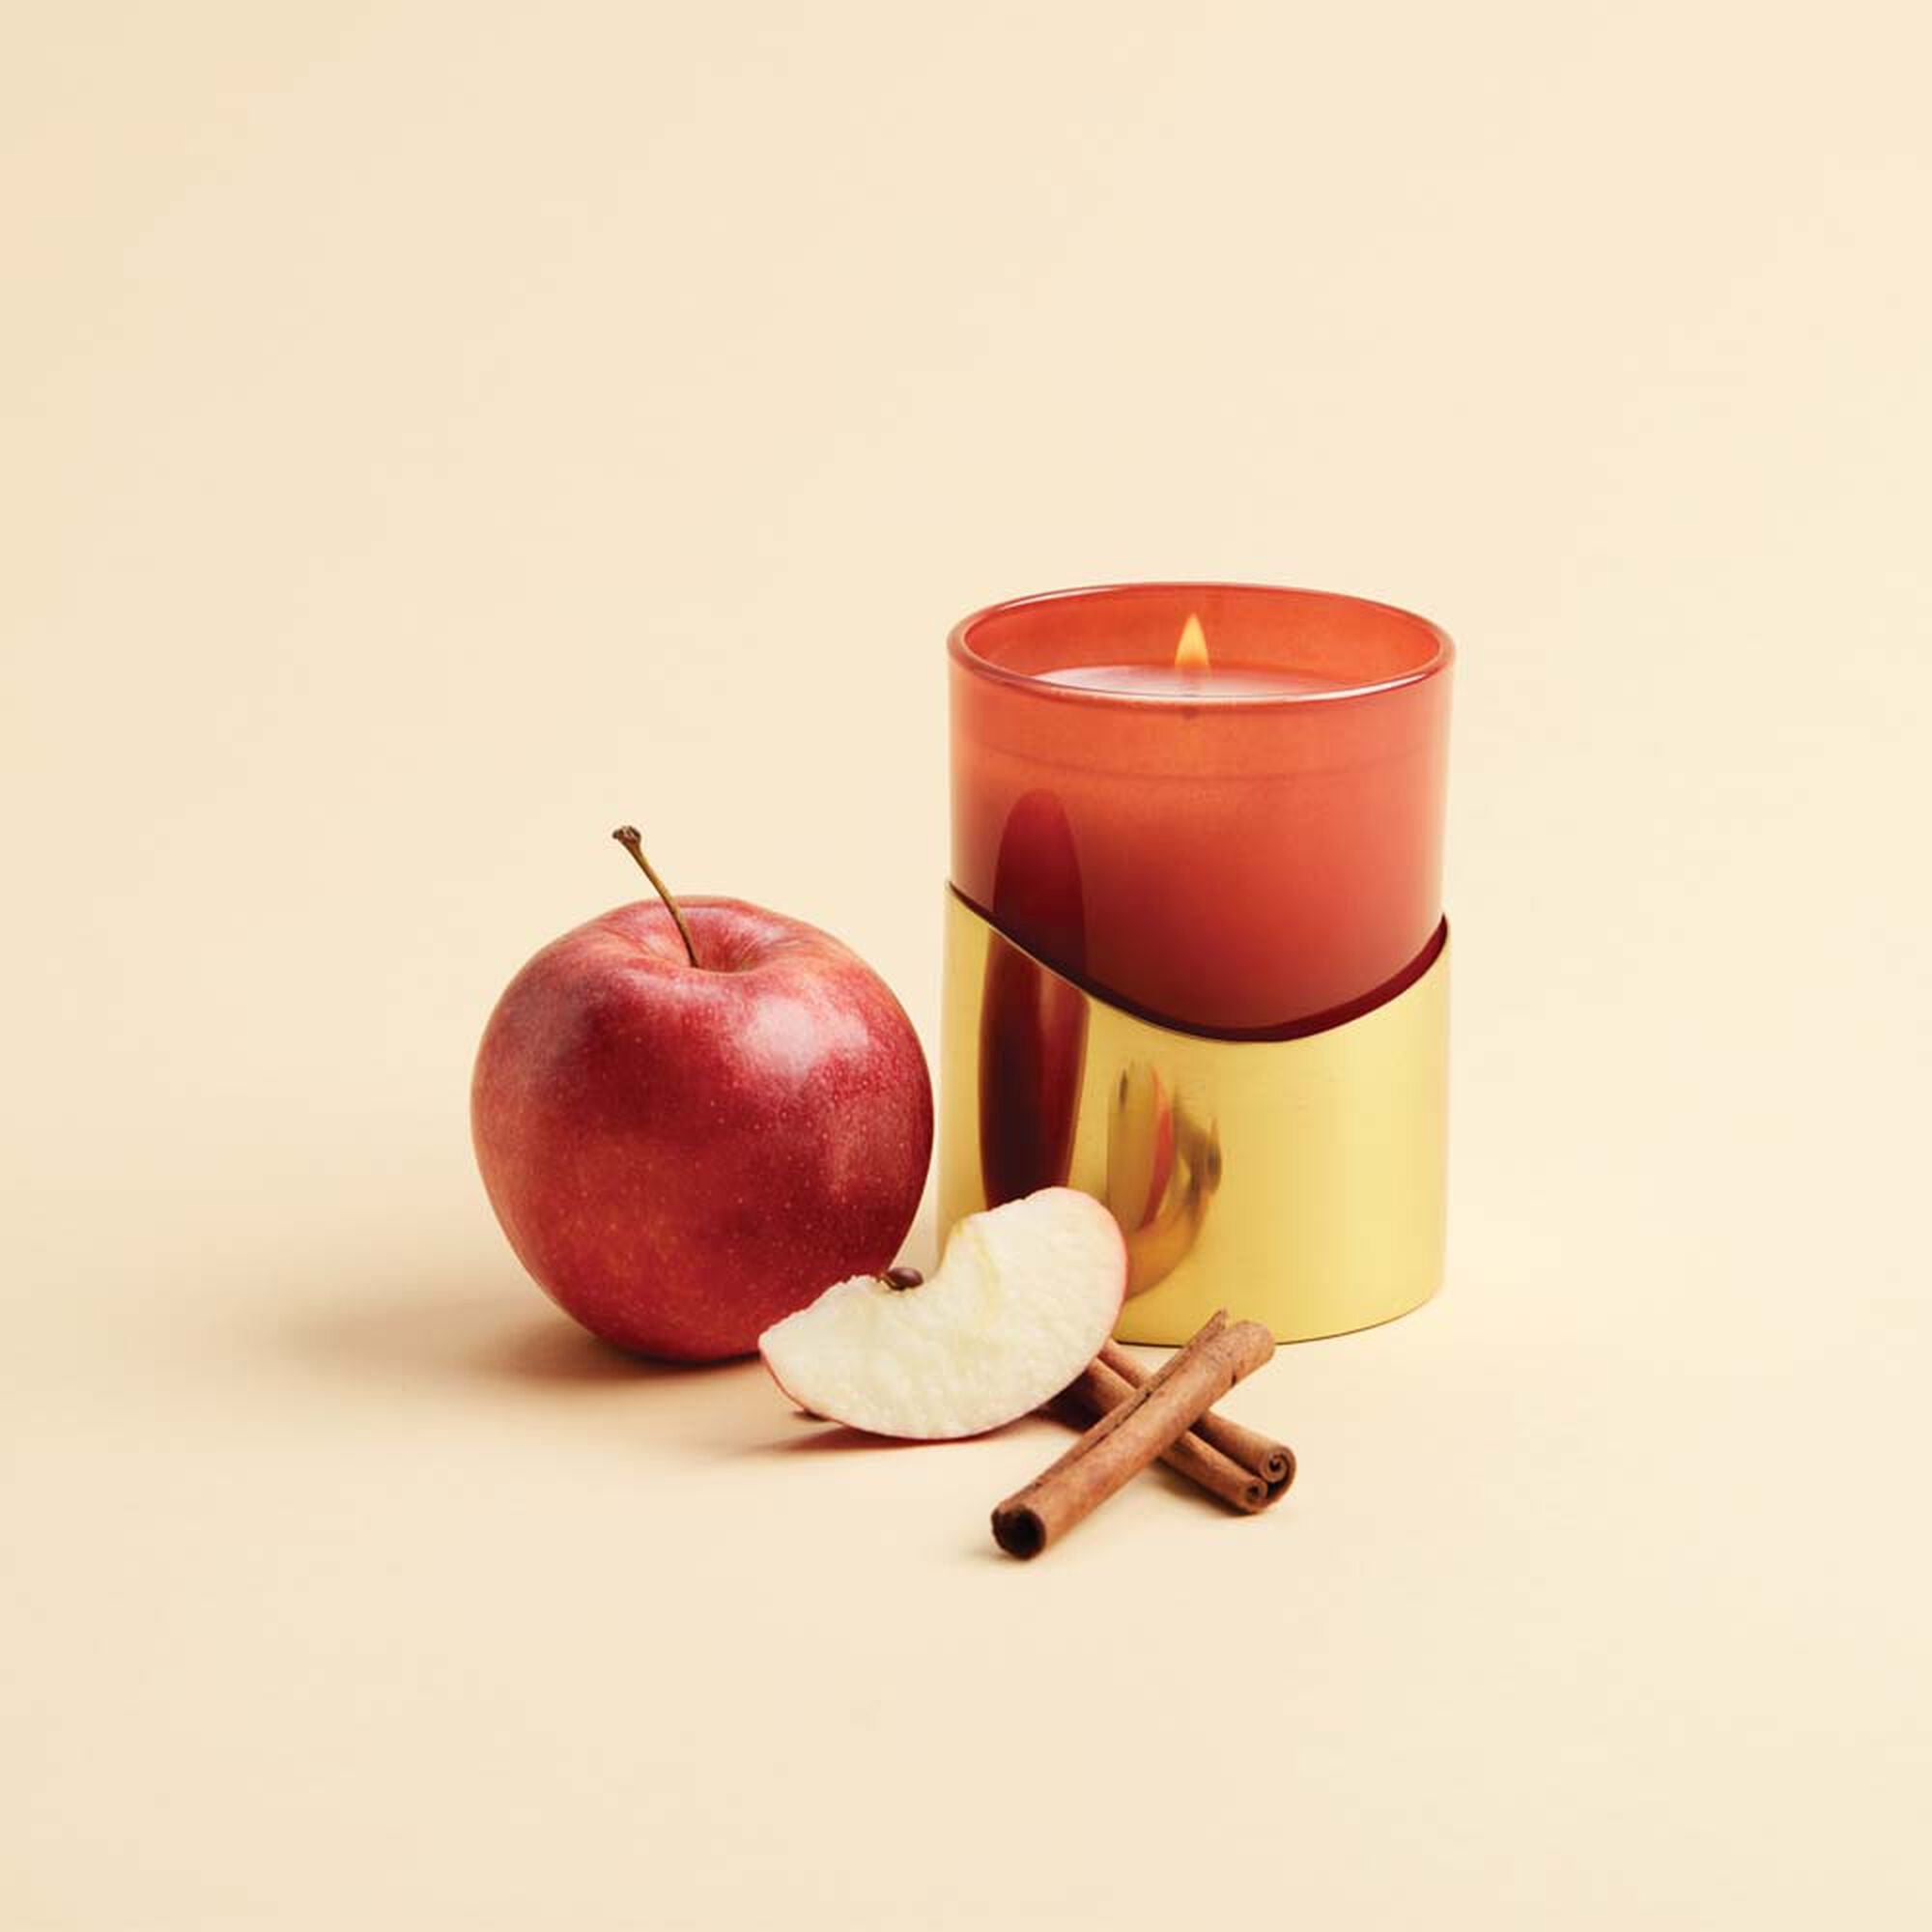 simmered-cider-candle-with-apple-holiday-2021-2000x2000.jpg